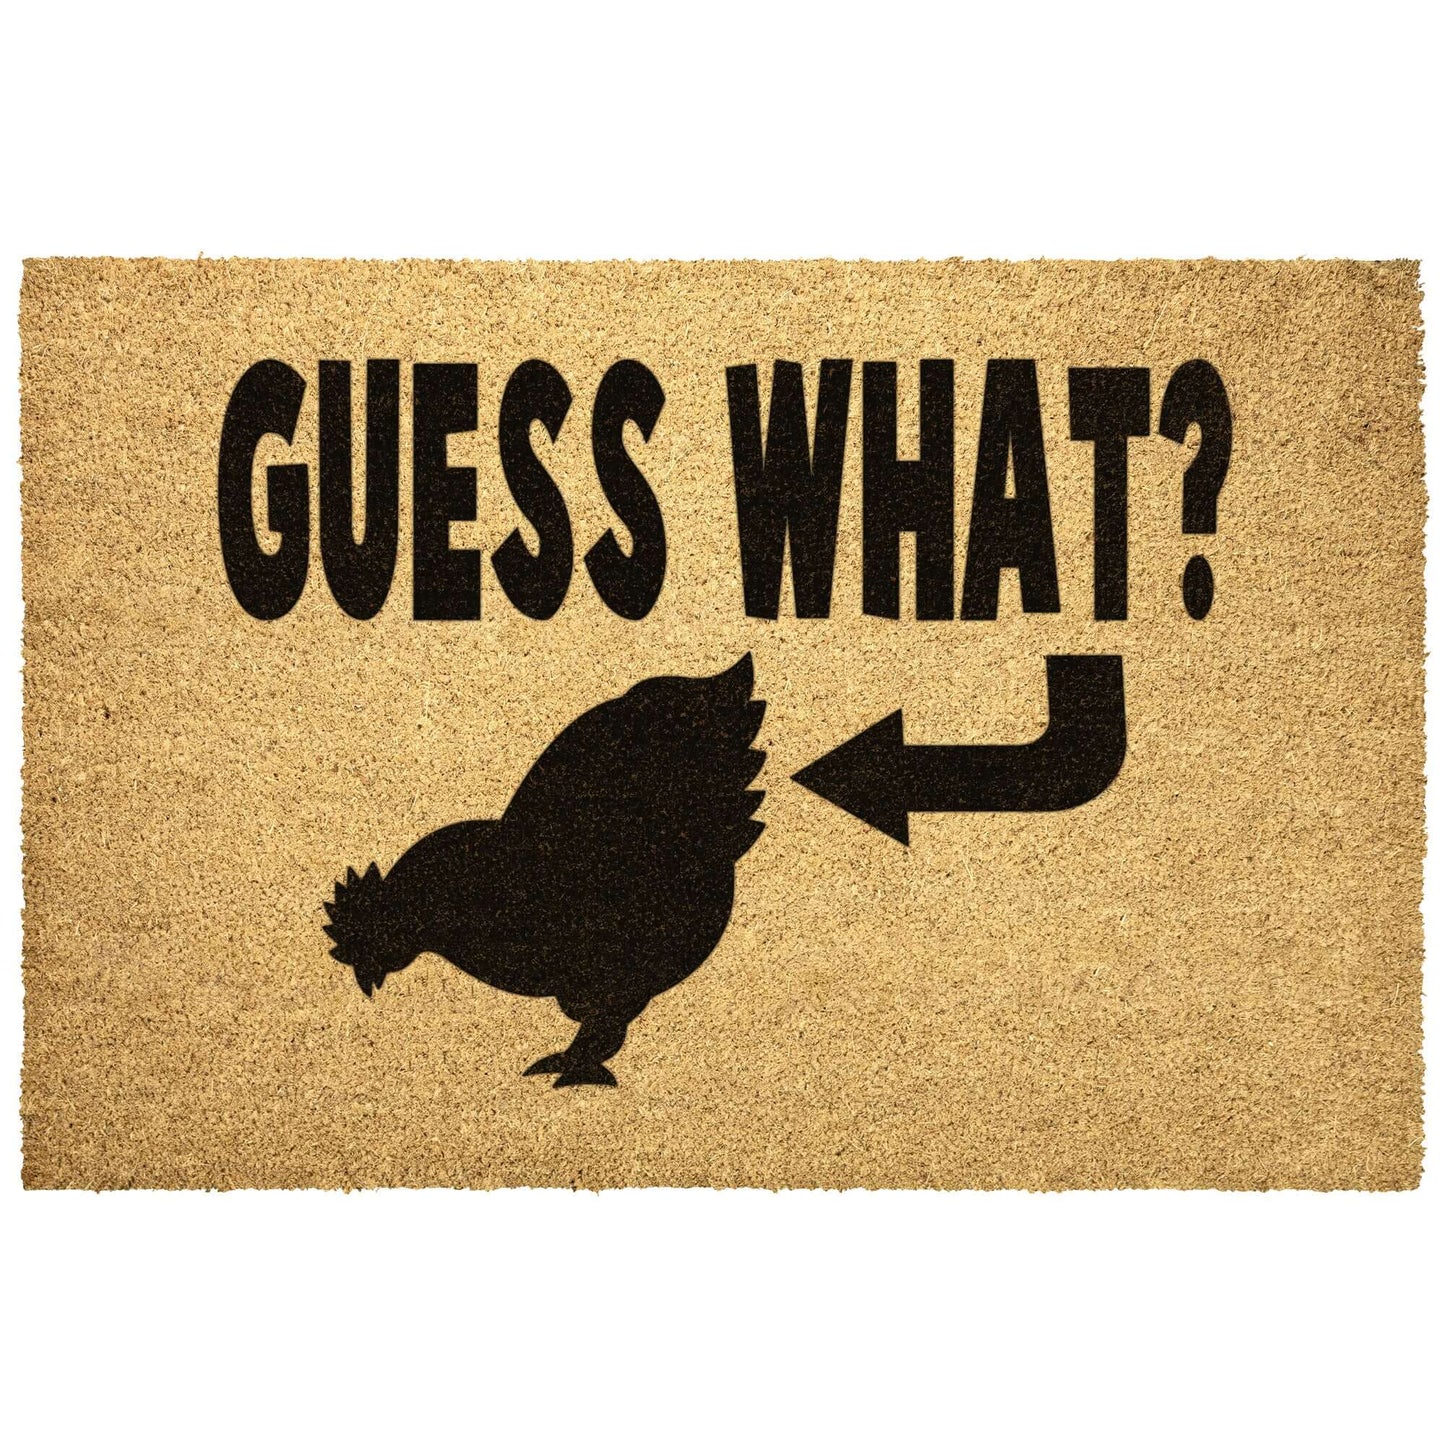 Tan color coconut coir fiber doormat with a Guess what chicken butt graphic printed in black.